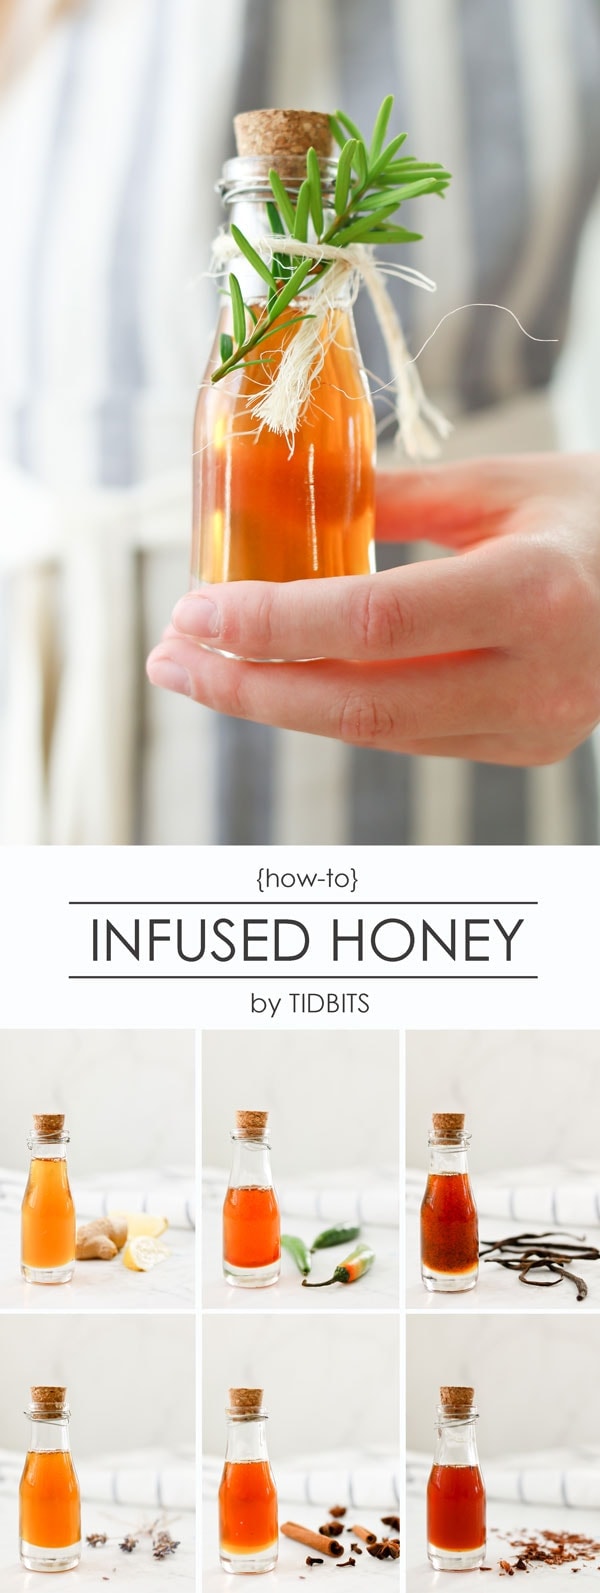 Flavor infused honey, with all the flavor varieties you could dream up. Find out how at TIDBITS.